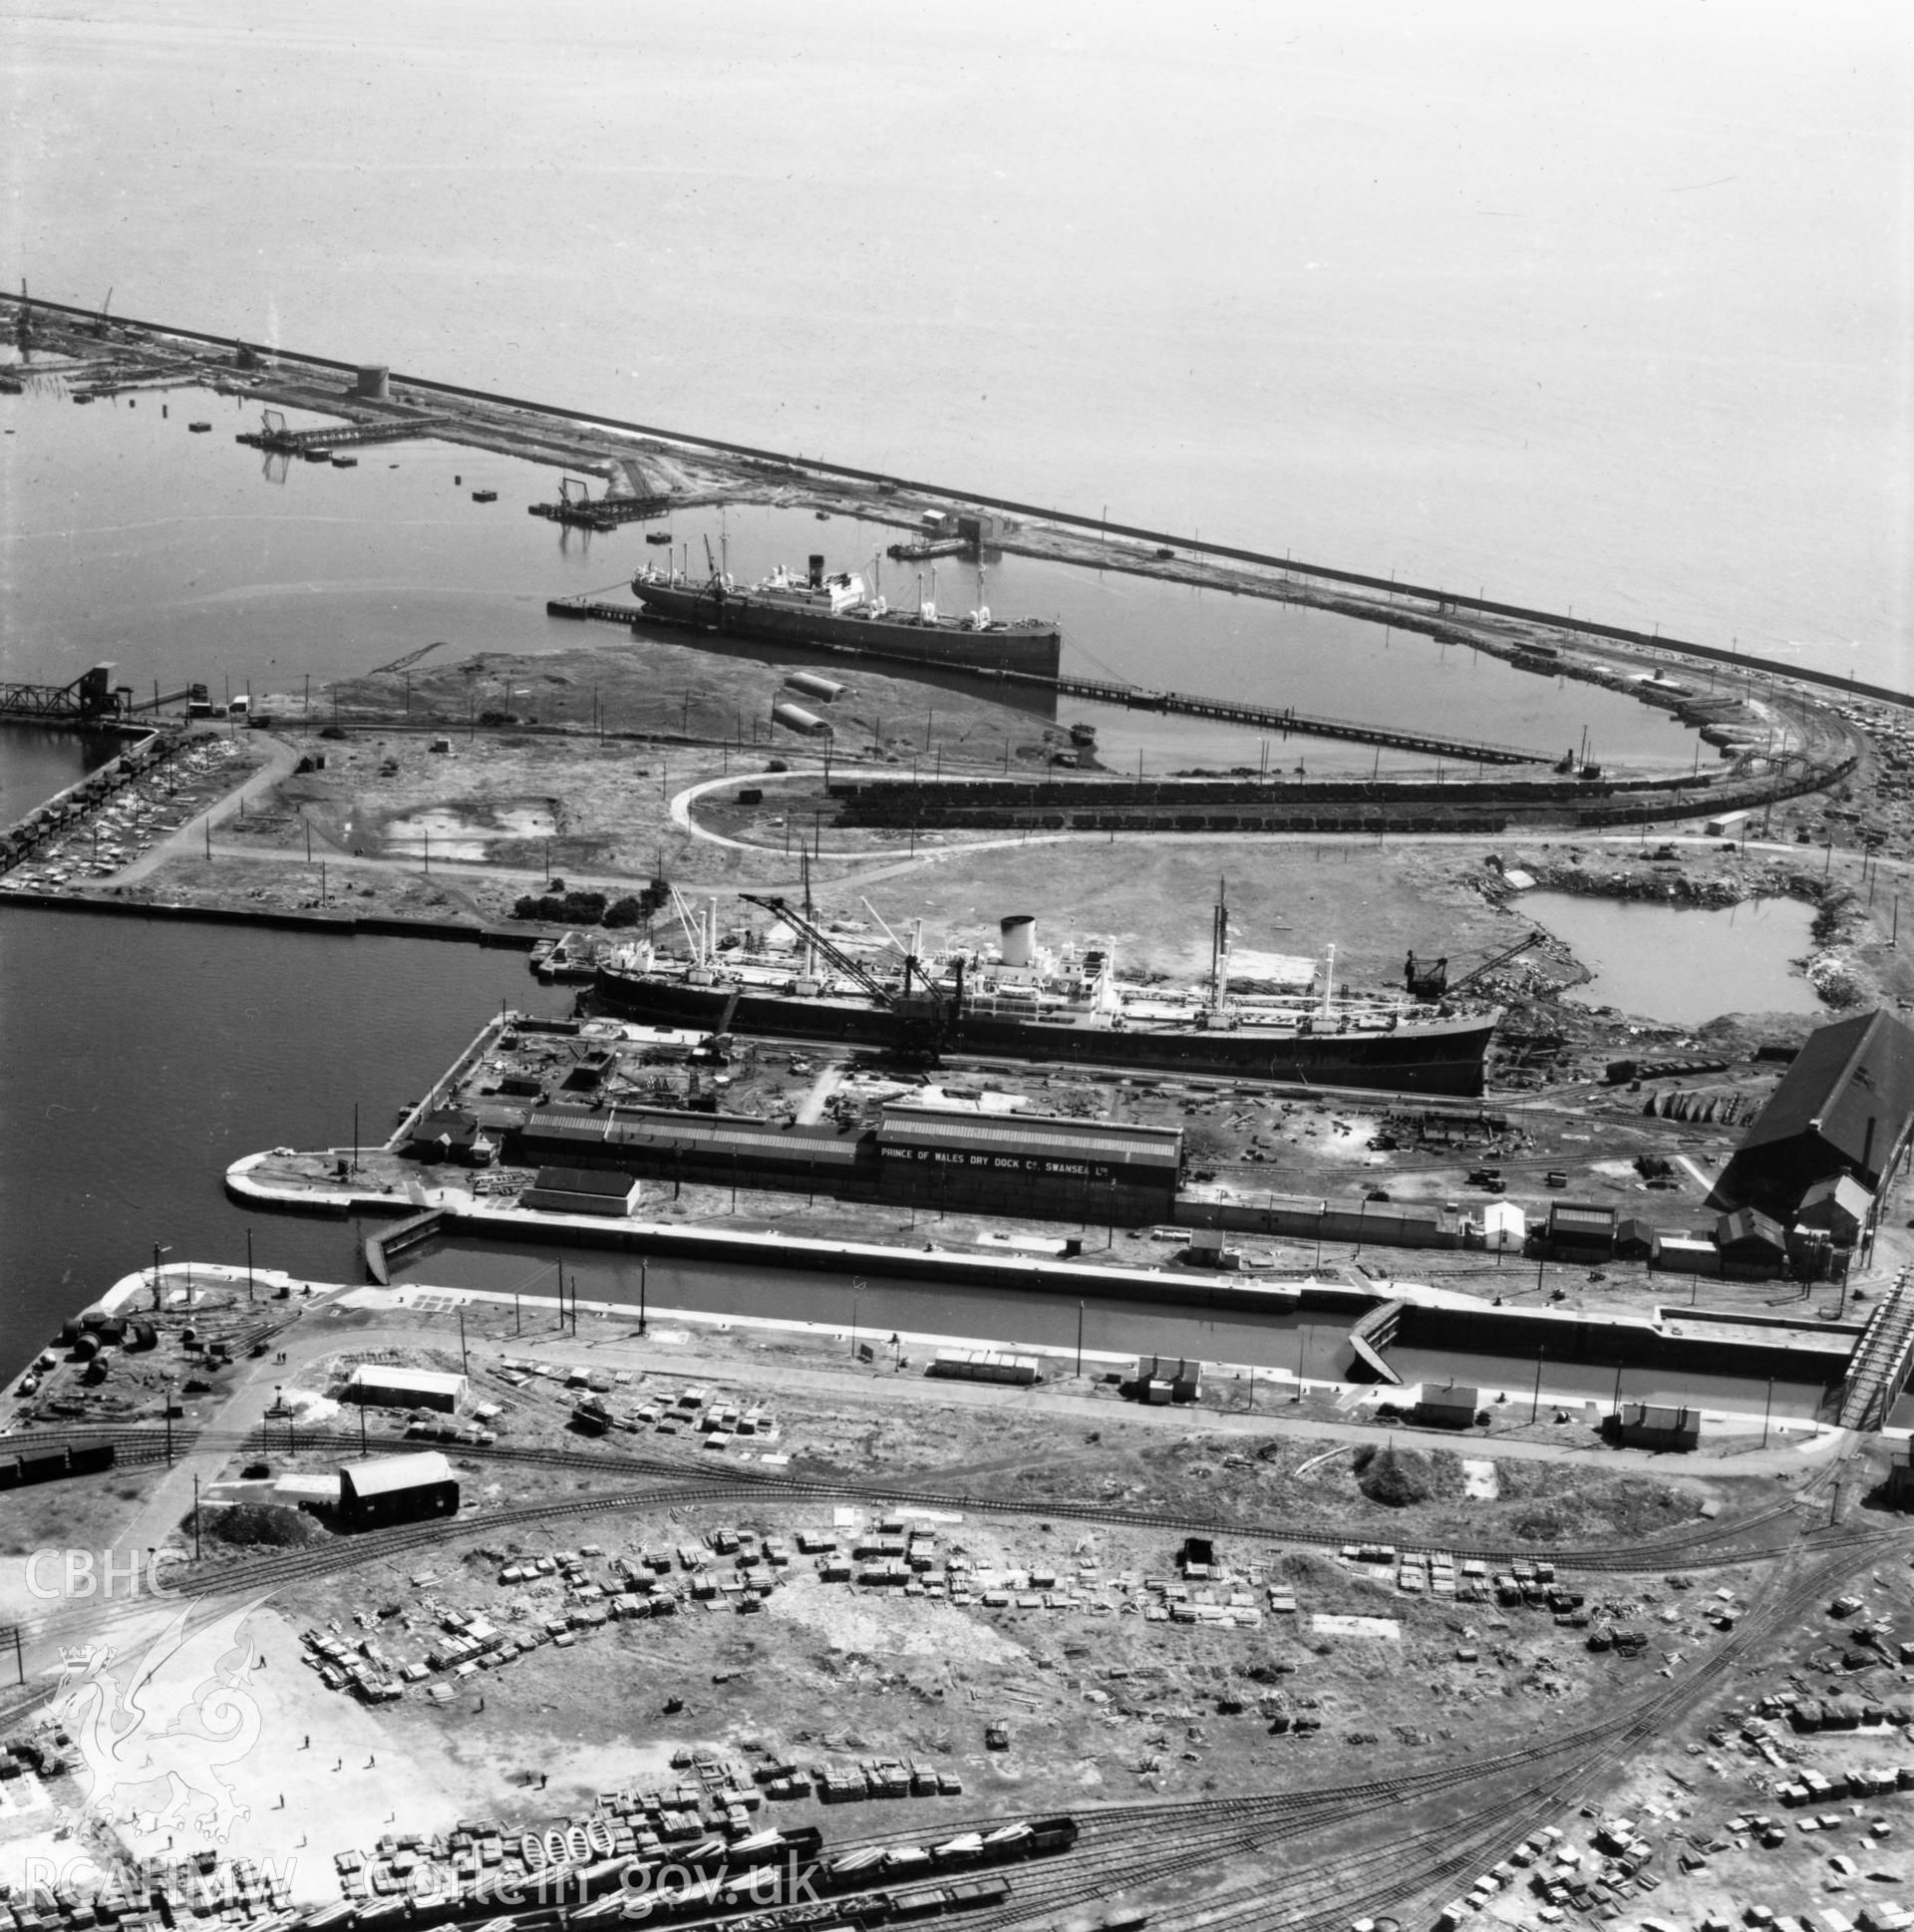 View of Palmers dry dock, Prince of Wales Dry Dock Co. Ltd., Swansea. Oblique aerial photograph, 5?" cut roll film.